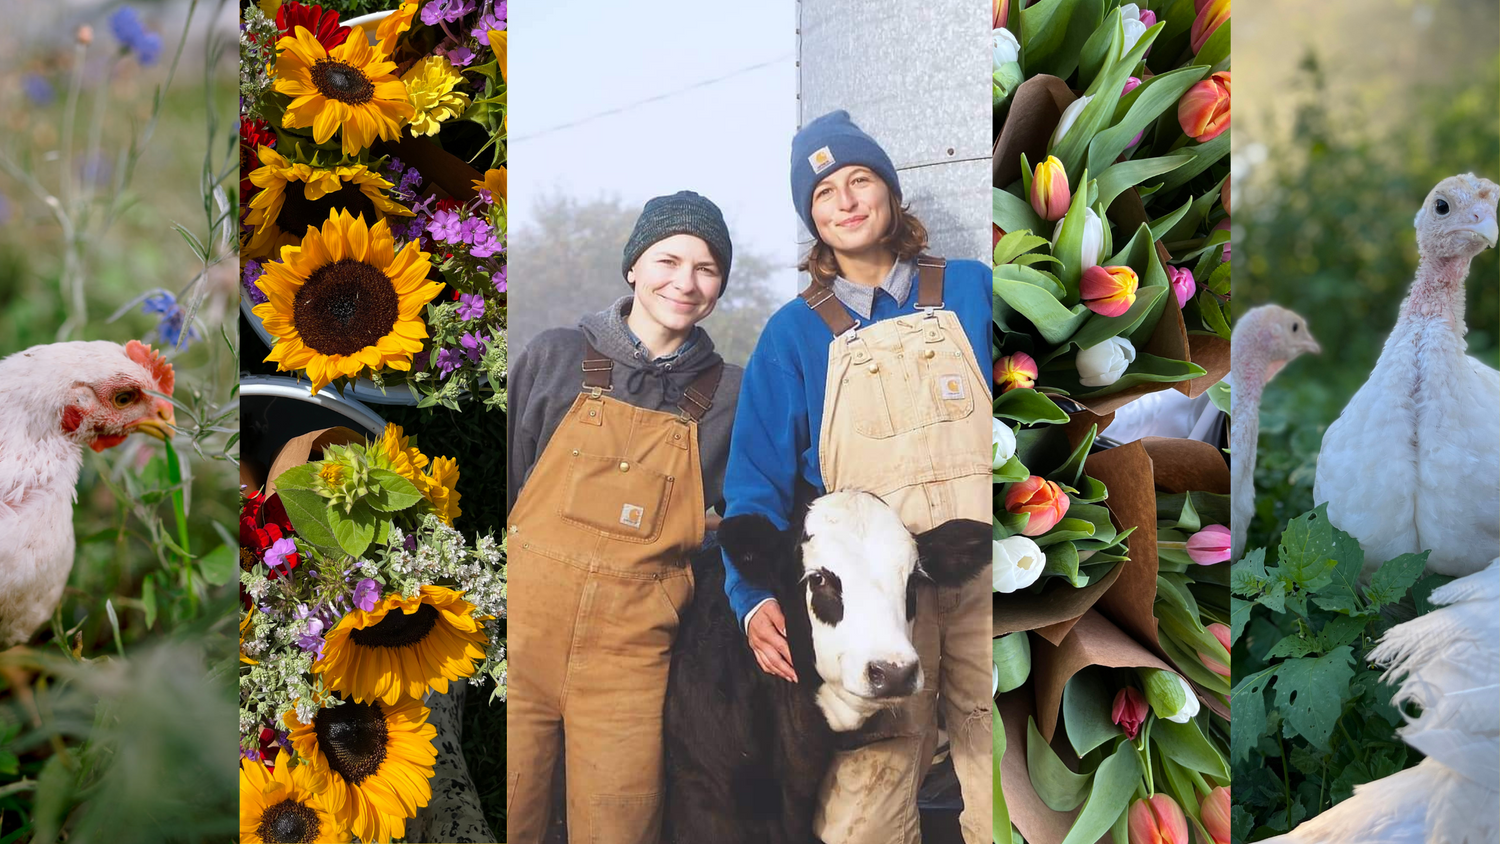 Collage of pasture raised chicken and turkeys, bouquets of tulips, bouquets of sunflowers, and two young women farmers standing with a black and white steer